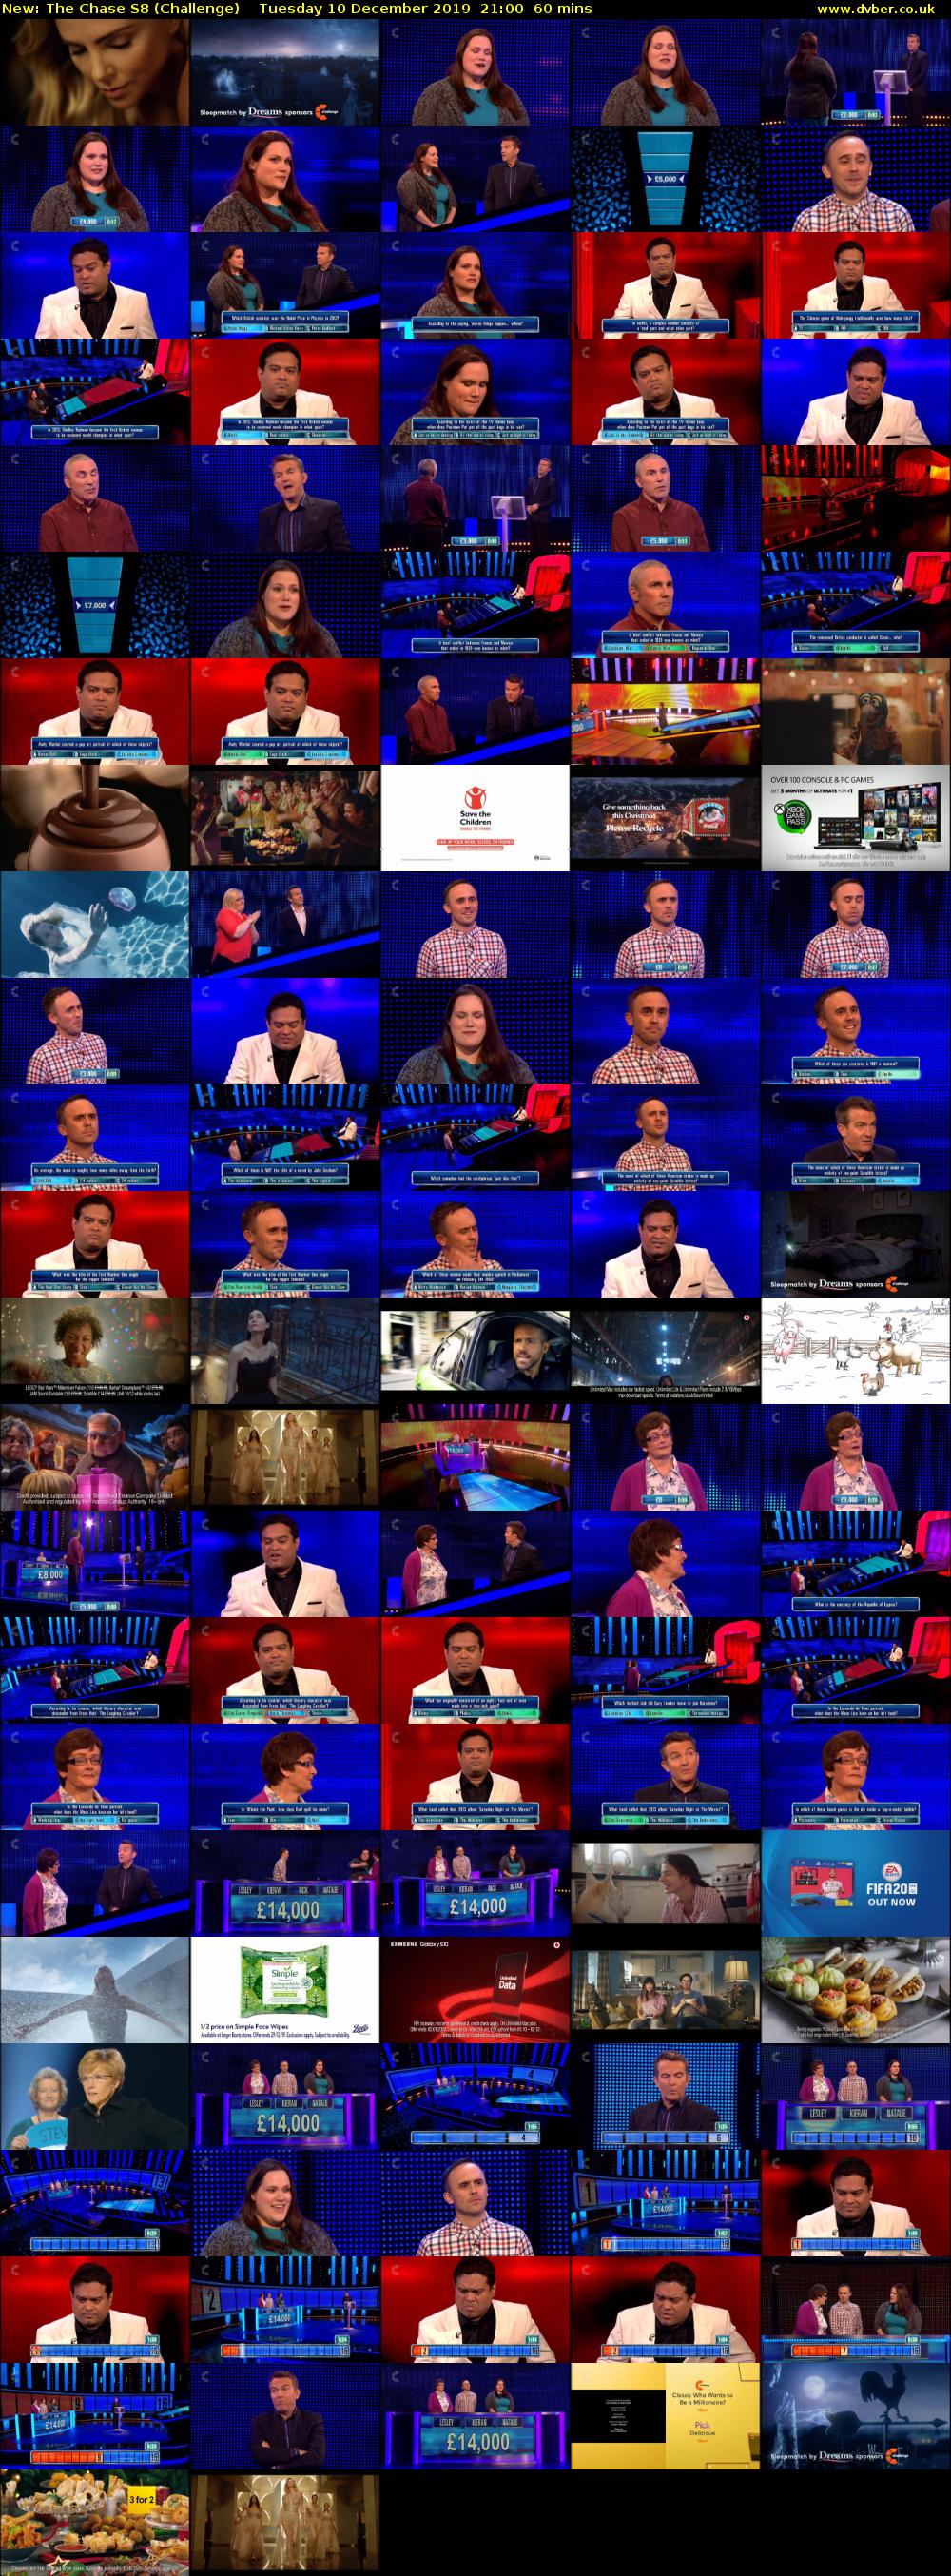 The Chase S8 (Challenge) Tuesday 10 December 2019 21:00 - 22:00